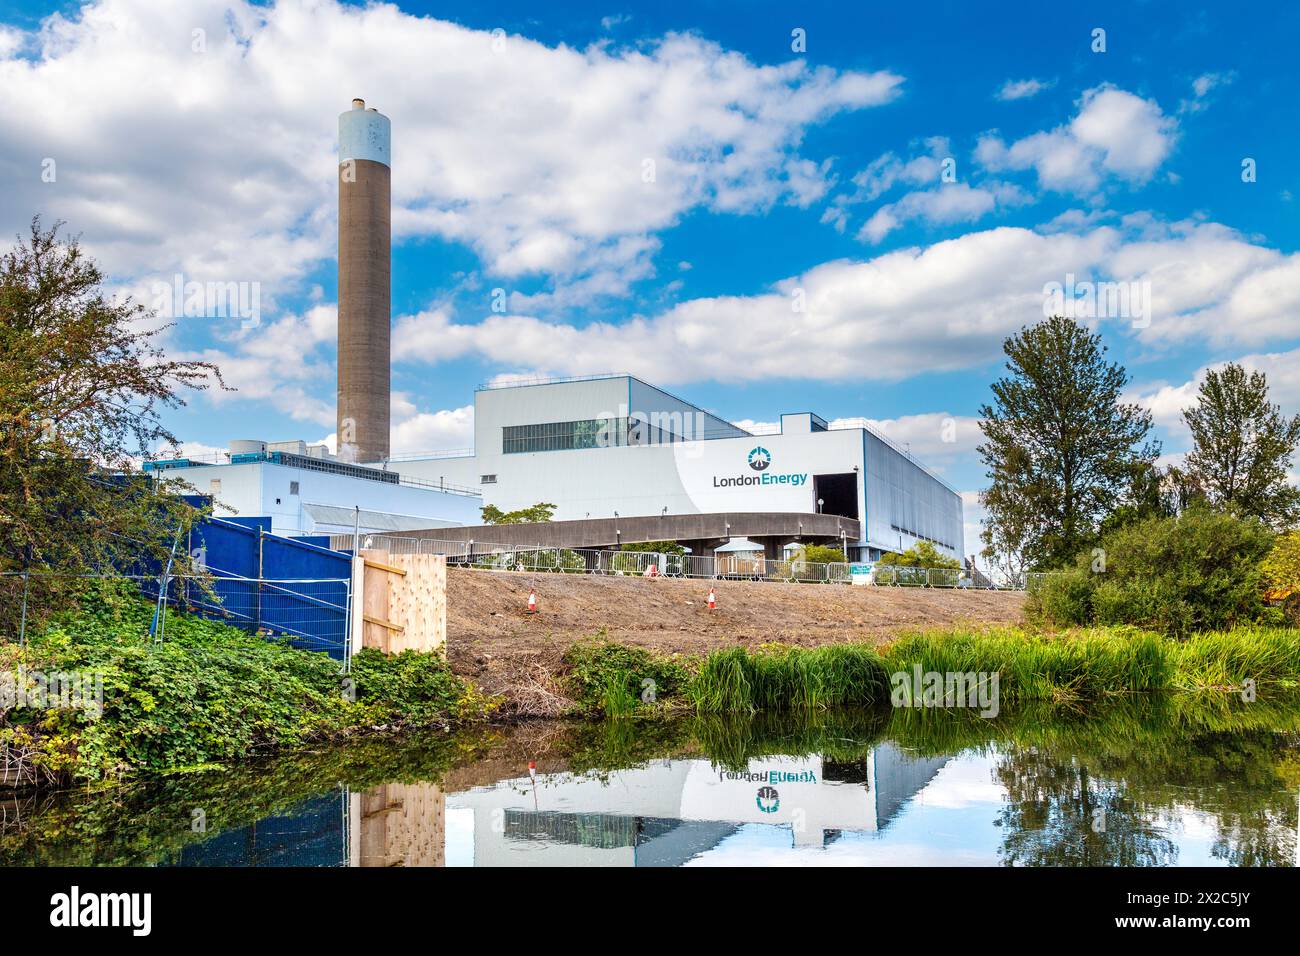 London Energy Edmonton Solid Waste Comineration Plant by the River Lee Navigation Canal, London, England Stockfoto